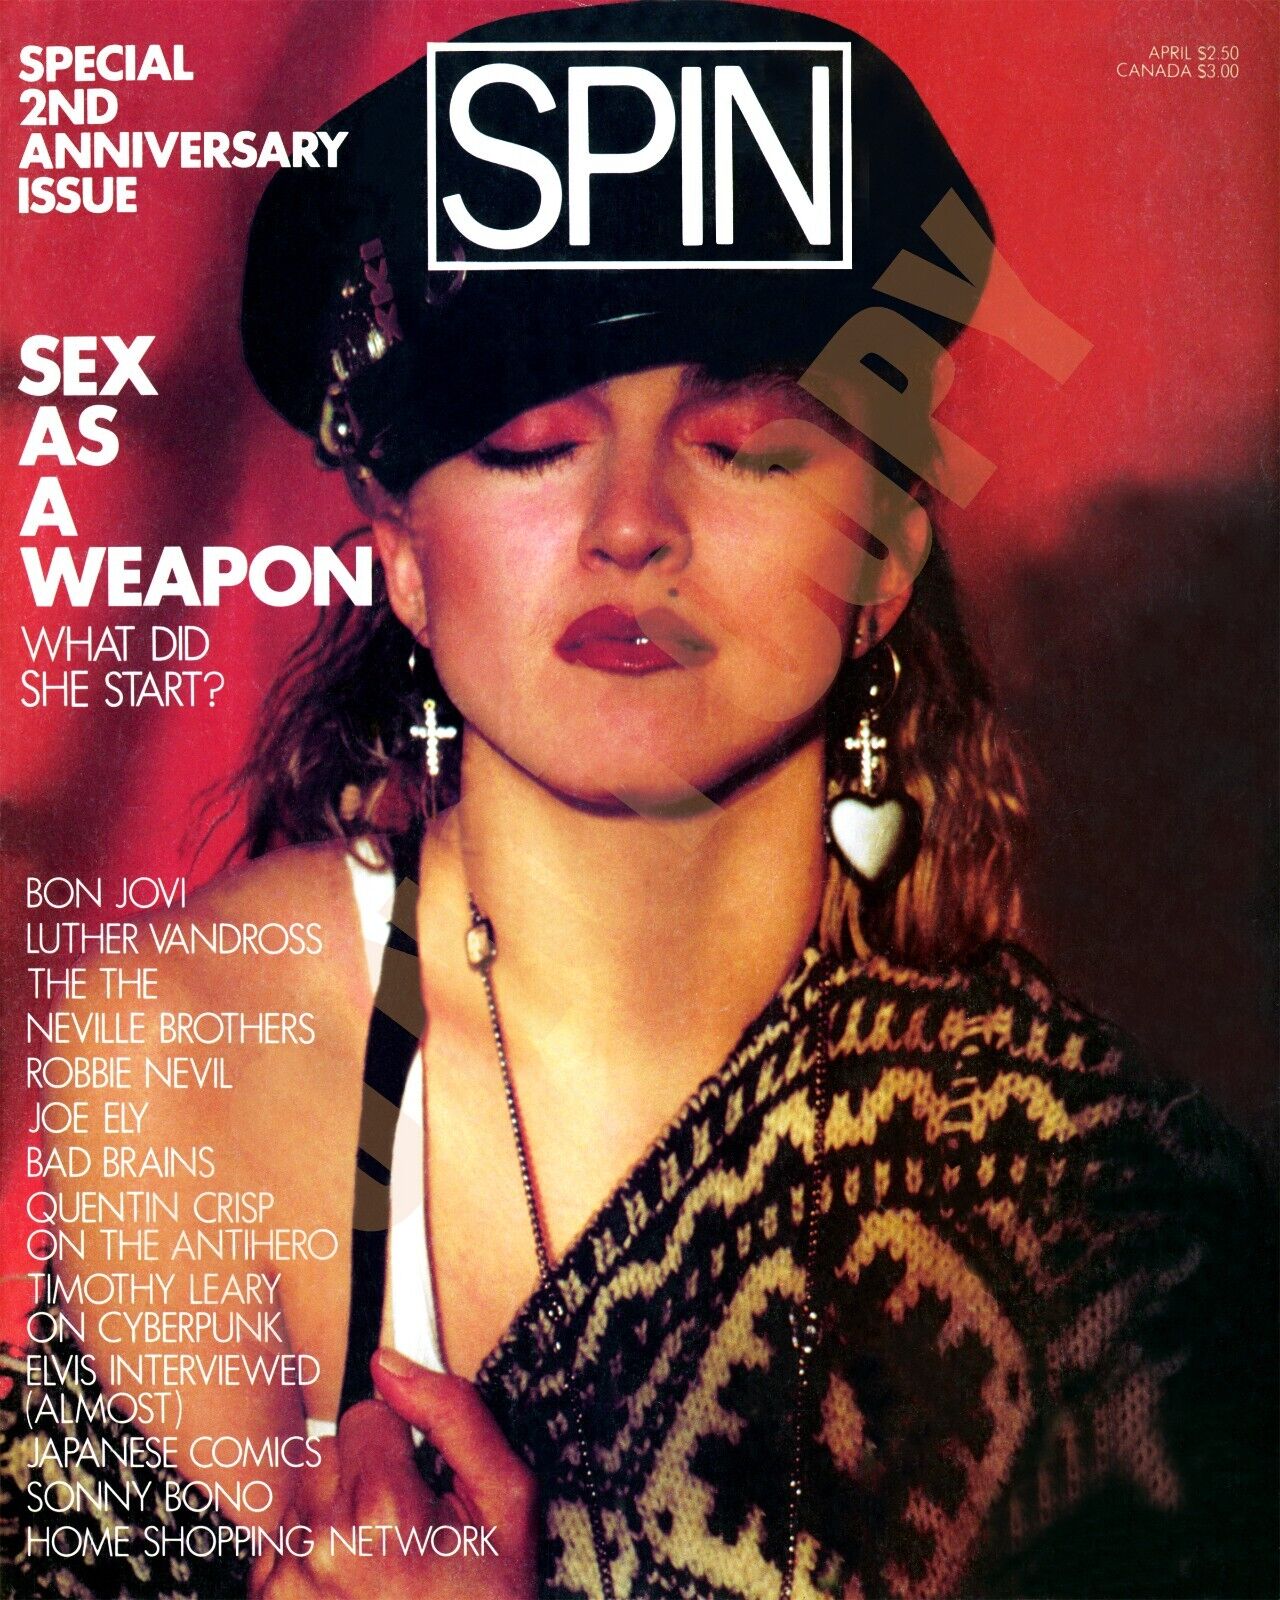 Madonna Spin Magazine Cover 1987 8x10 Photo  ✔AUCTION IS FOR PHOTO NOT MAG ✔